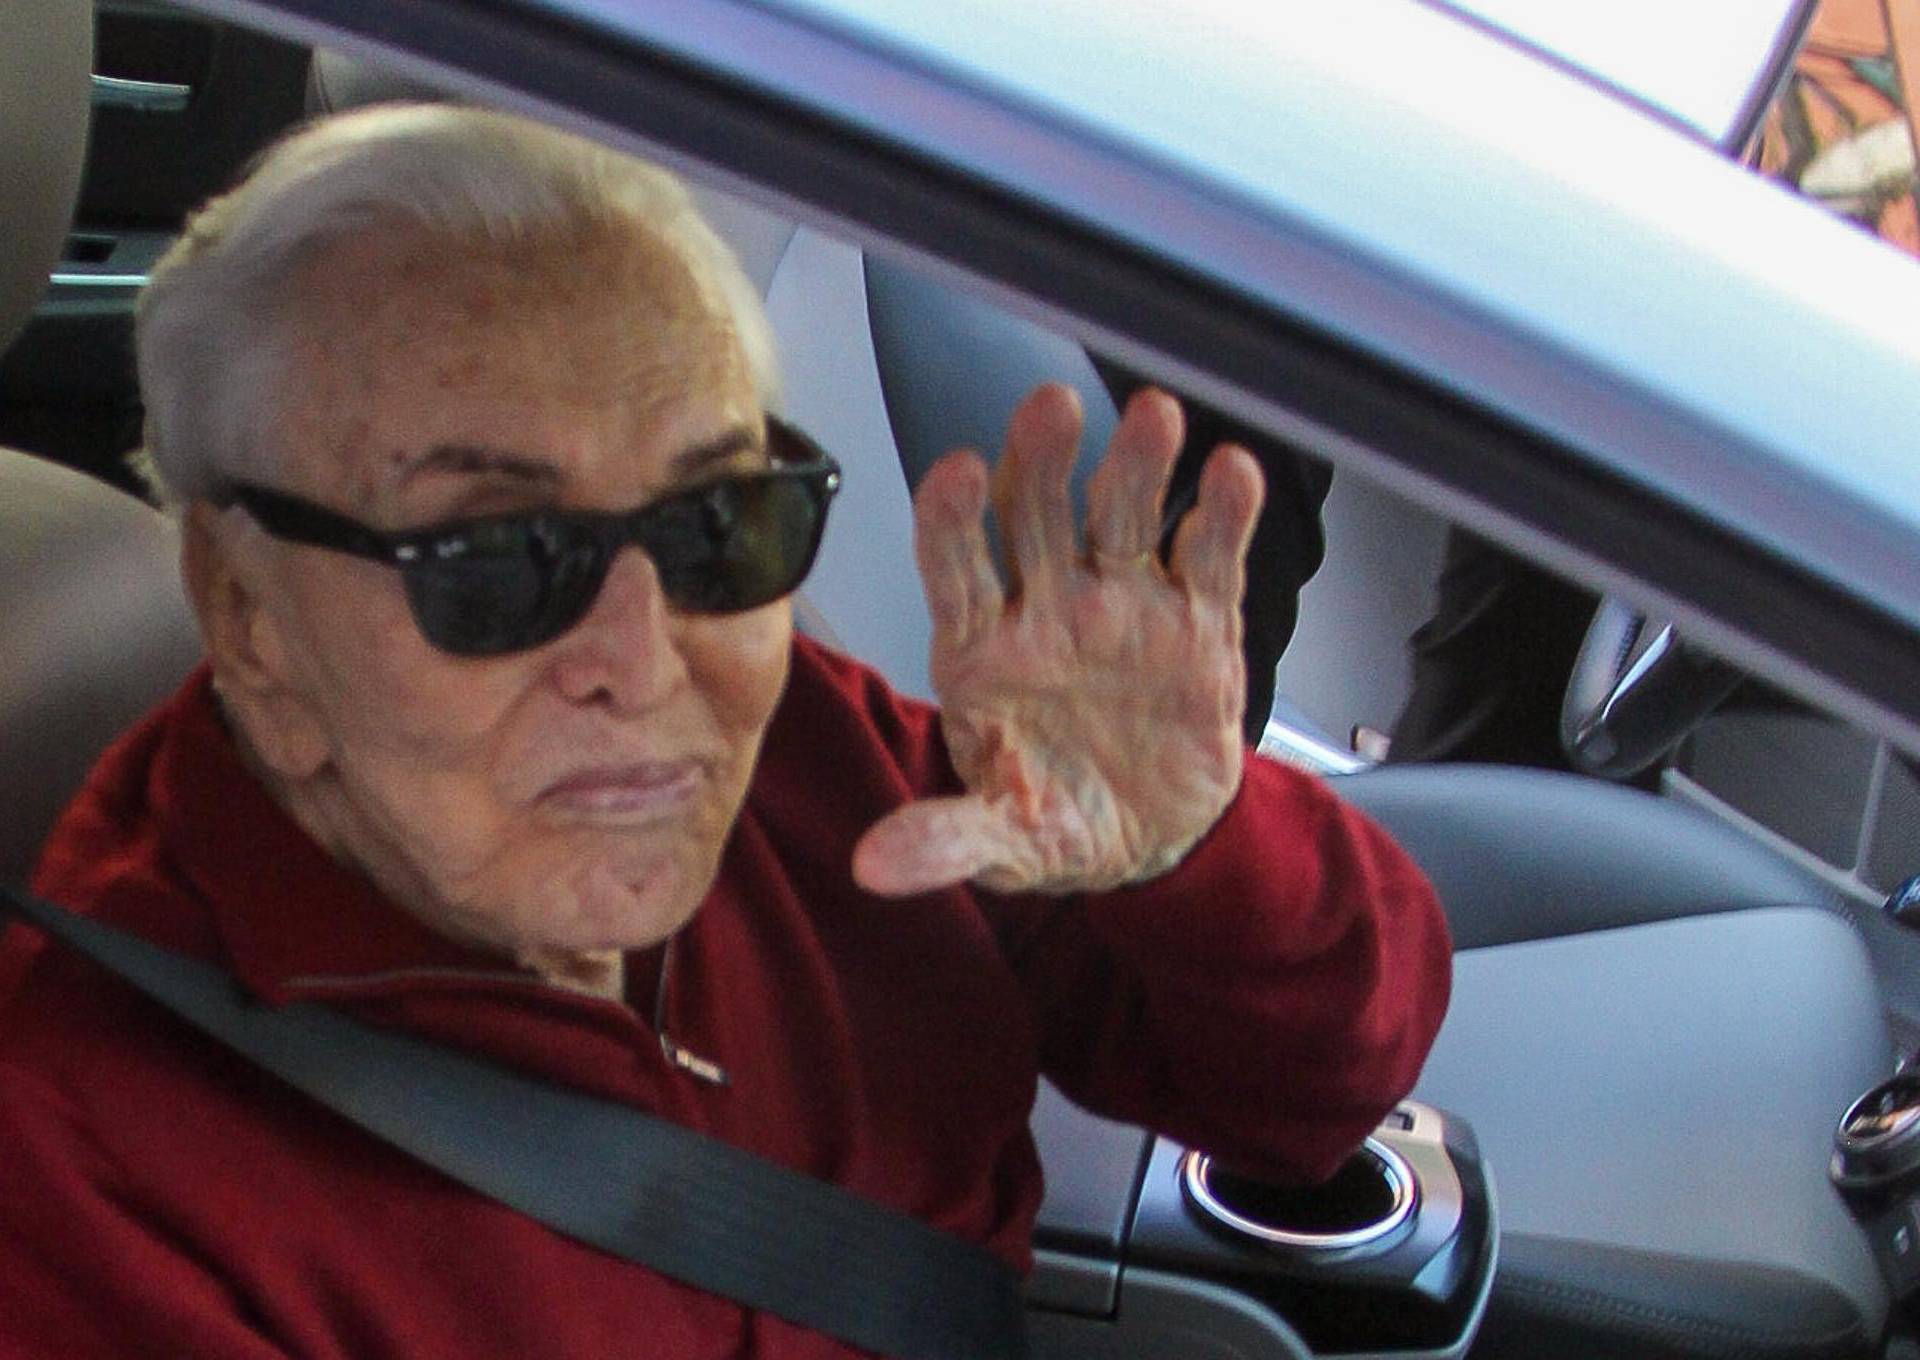 A spry 99 year old Kirk Douglas waves goodbye after a trip to his doctor